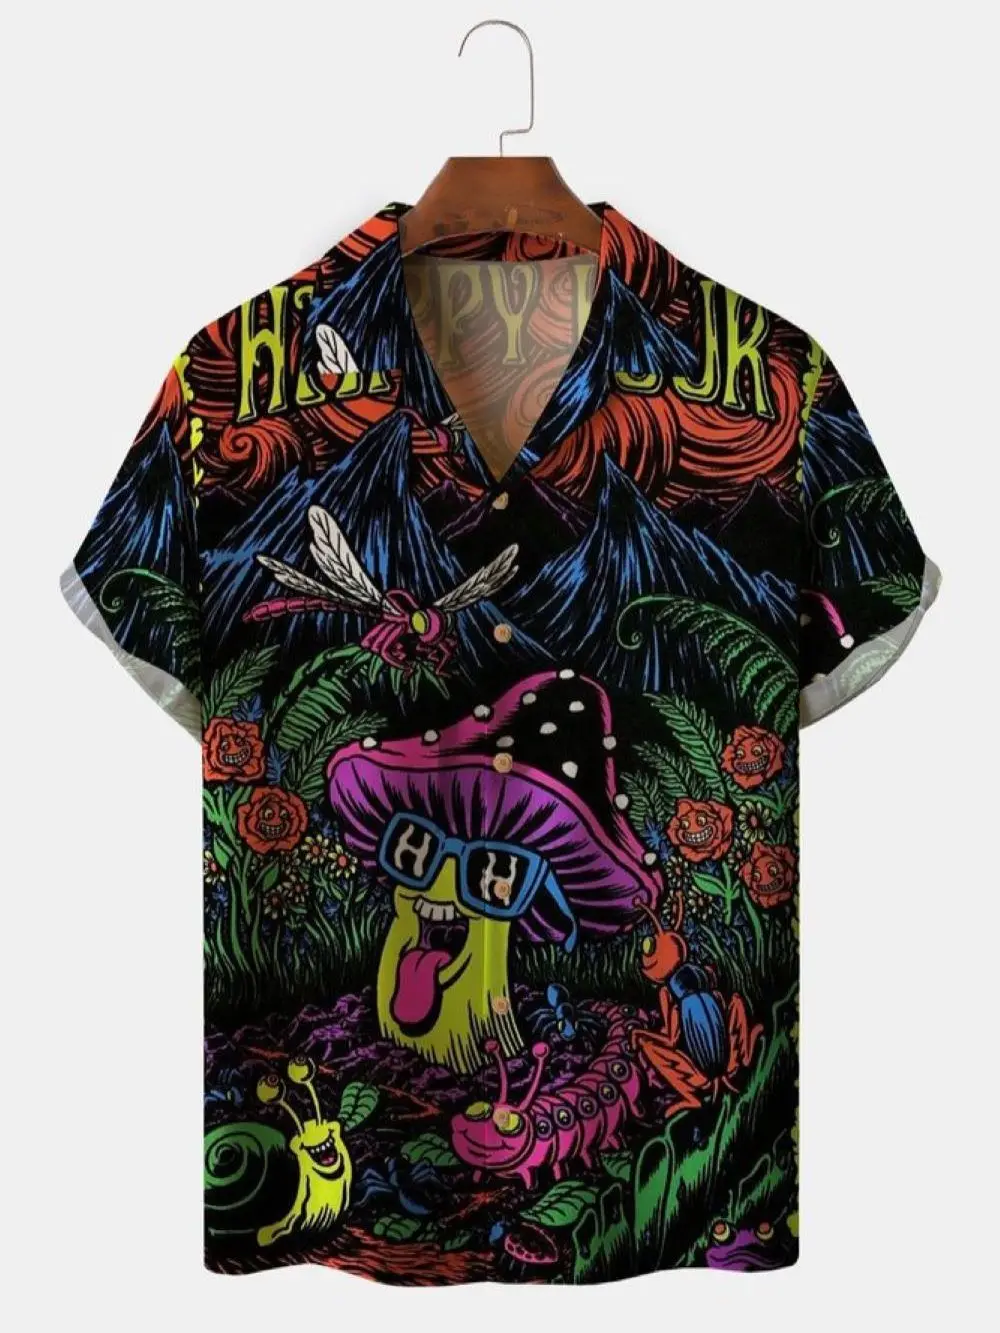 2023 new Mens Hippies Peace & Love Print Front Buttons Soft Breathable Chest Pocket Casual Hawaiian Shirt smens shirts luxury